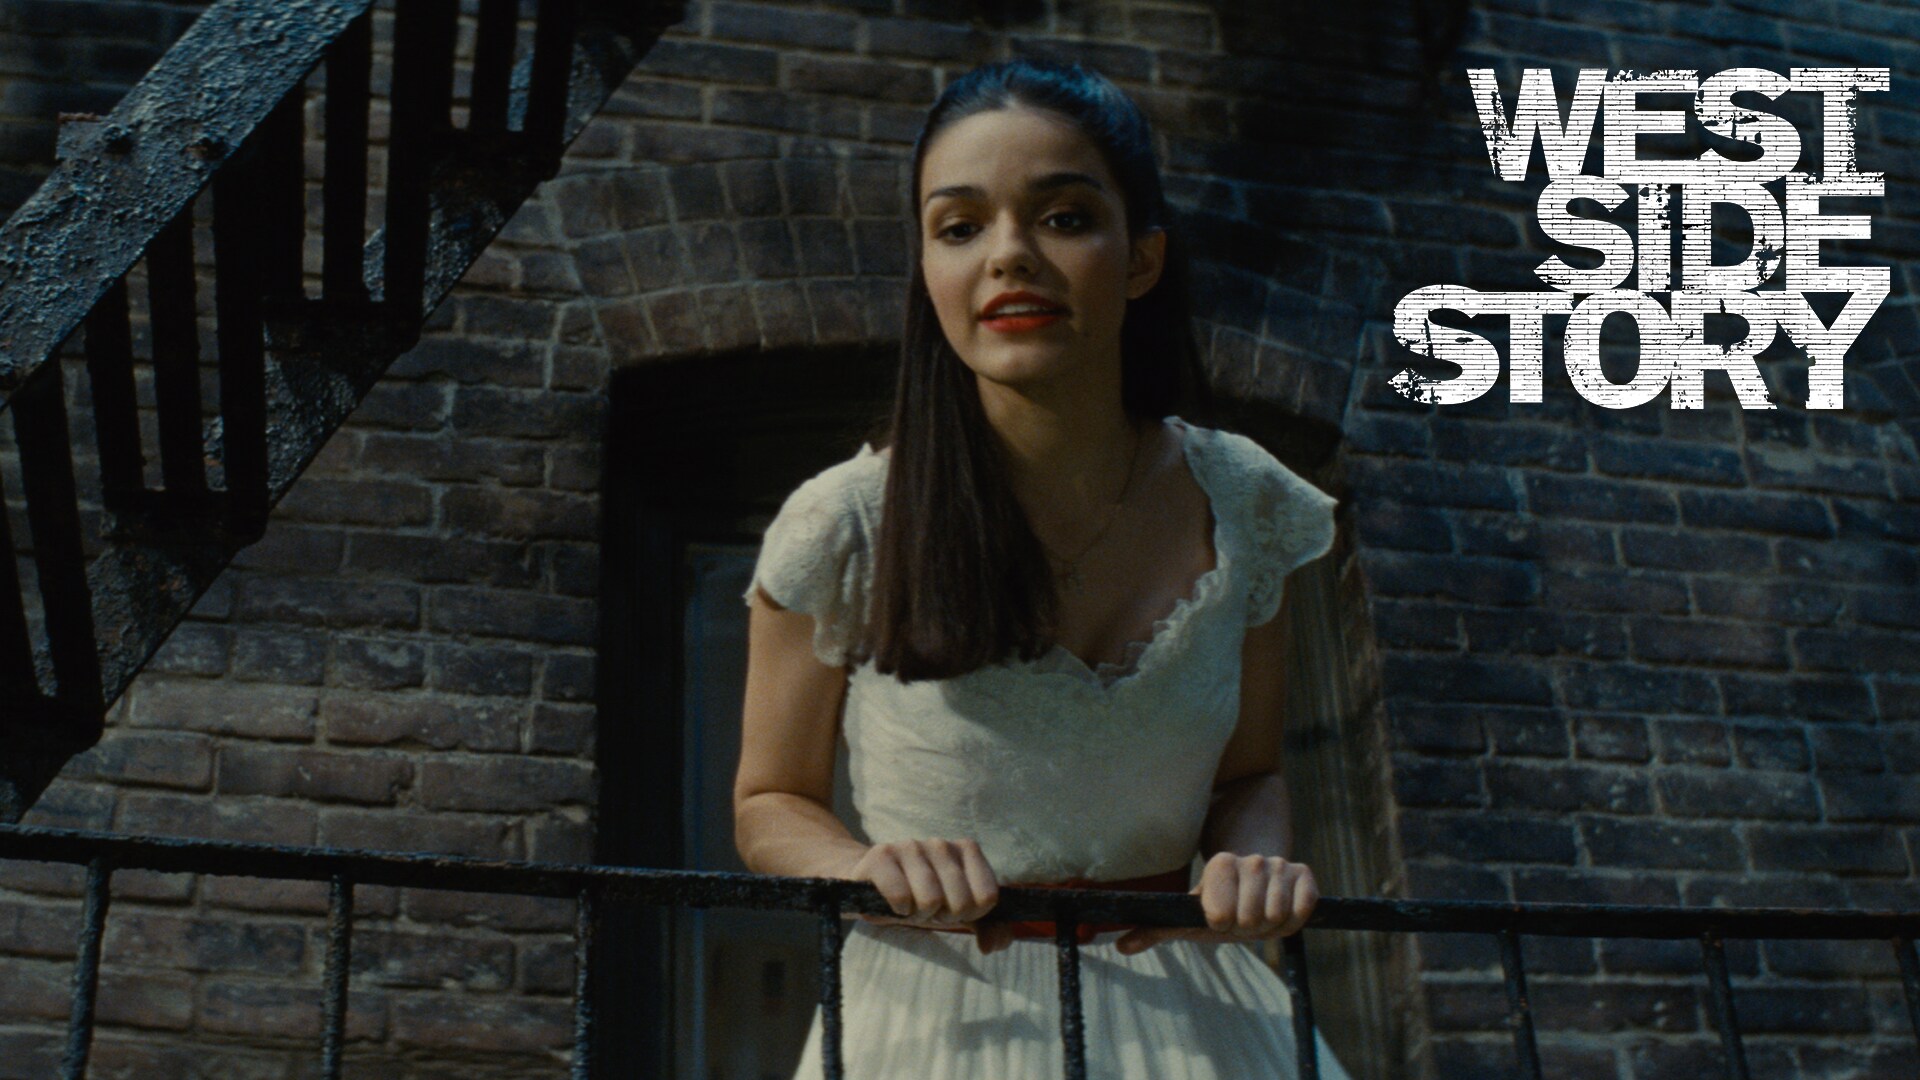 Critics are calling Steven Spielberg’s #WestSideStory the must see movie event of the year! Get tickets now to experience the film only in theaters December 10! Fandango.com/WestSideStory